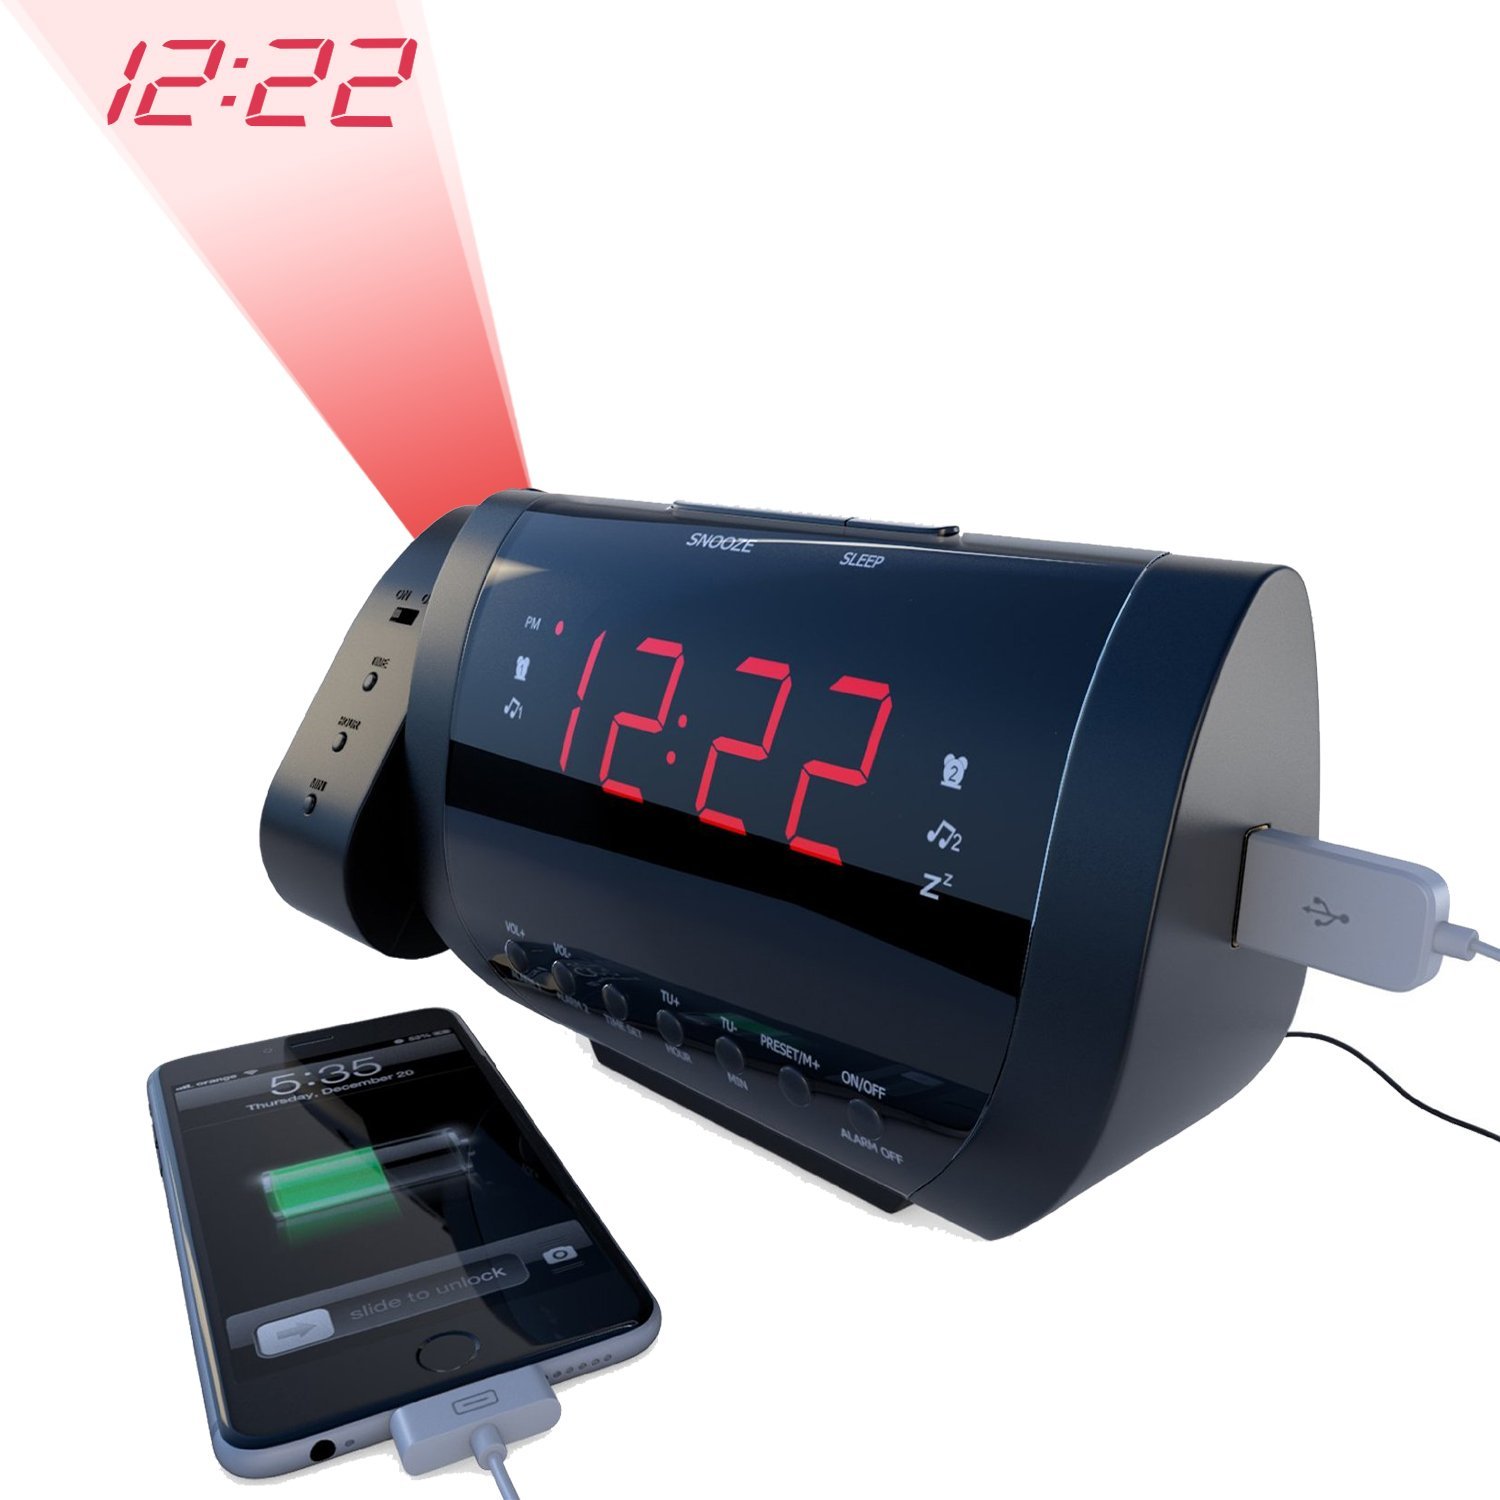 Edge Pro Alarm Clock Radio with Time Projection and USB Charger